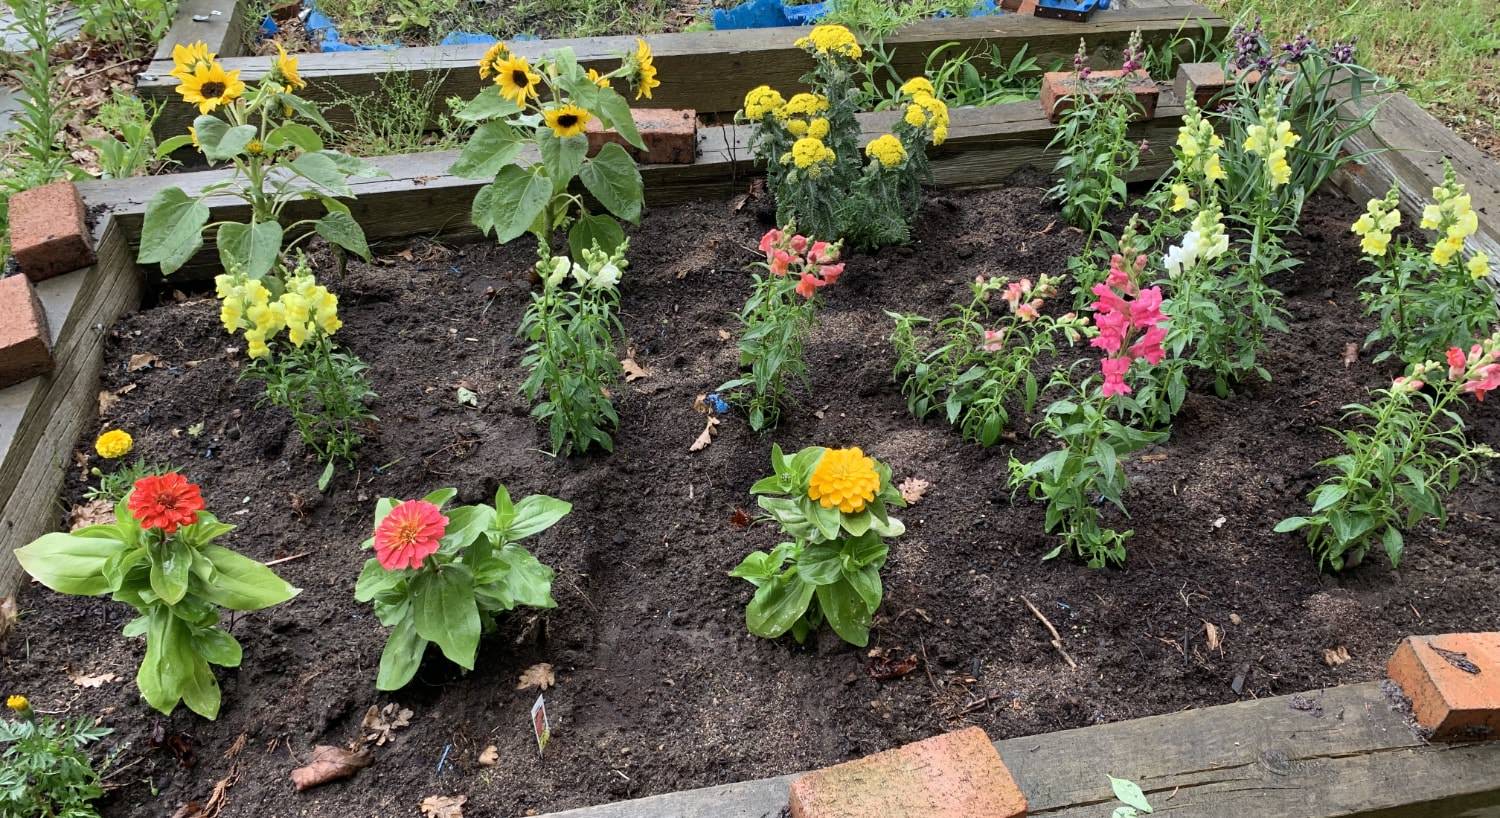 Raised flowerbed with yellow, pink, and purple flowers